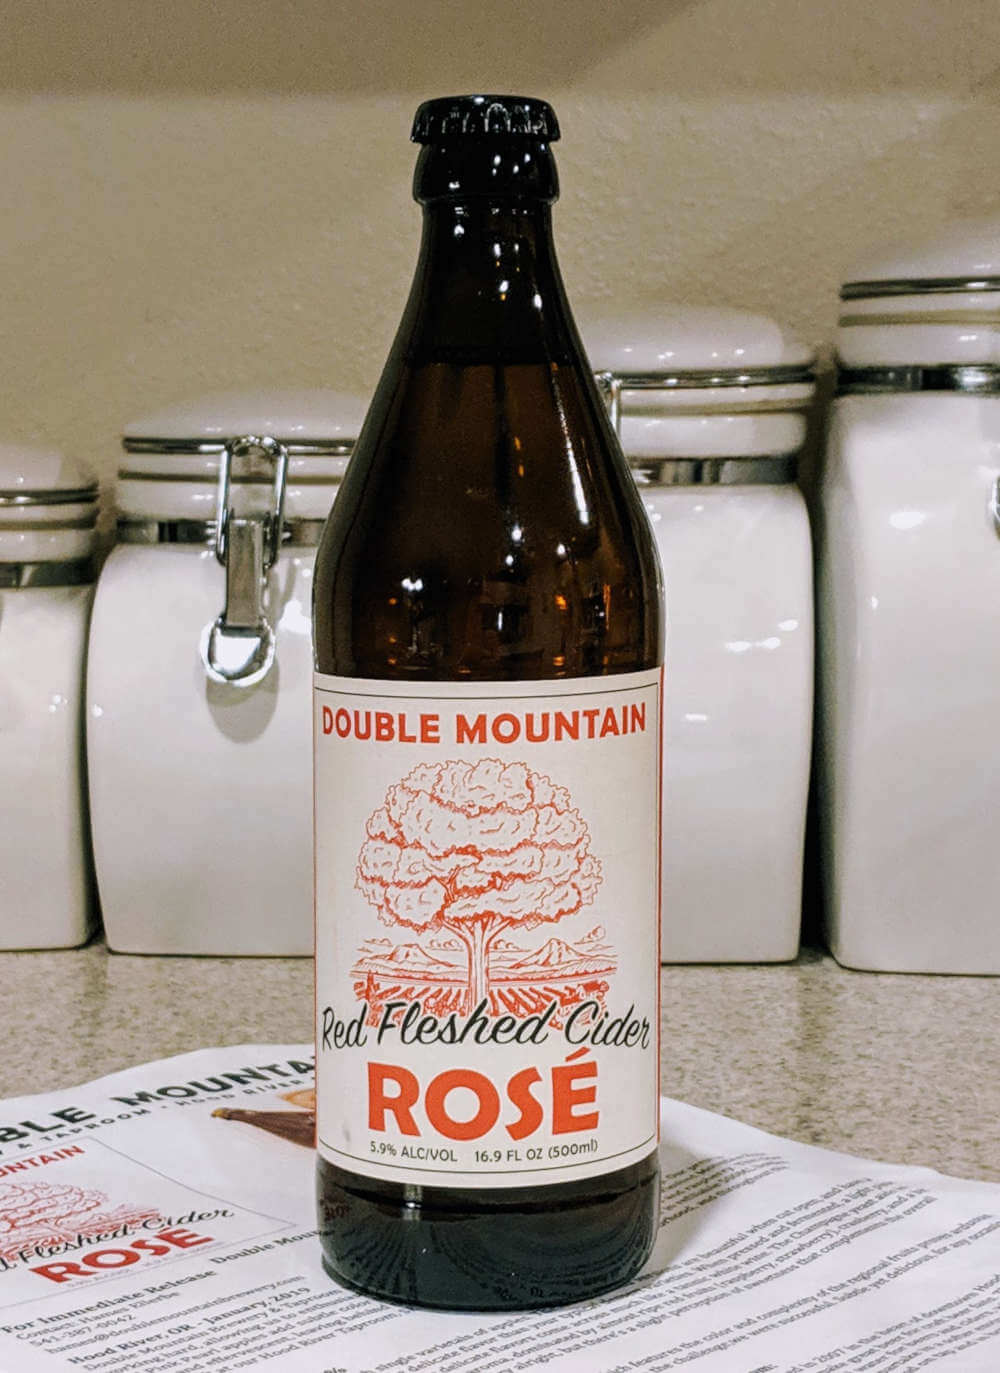 Received: Double Mountain Red Fleshed Rosé Cider